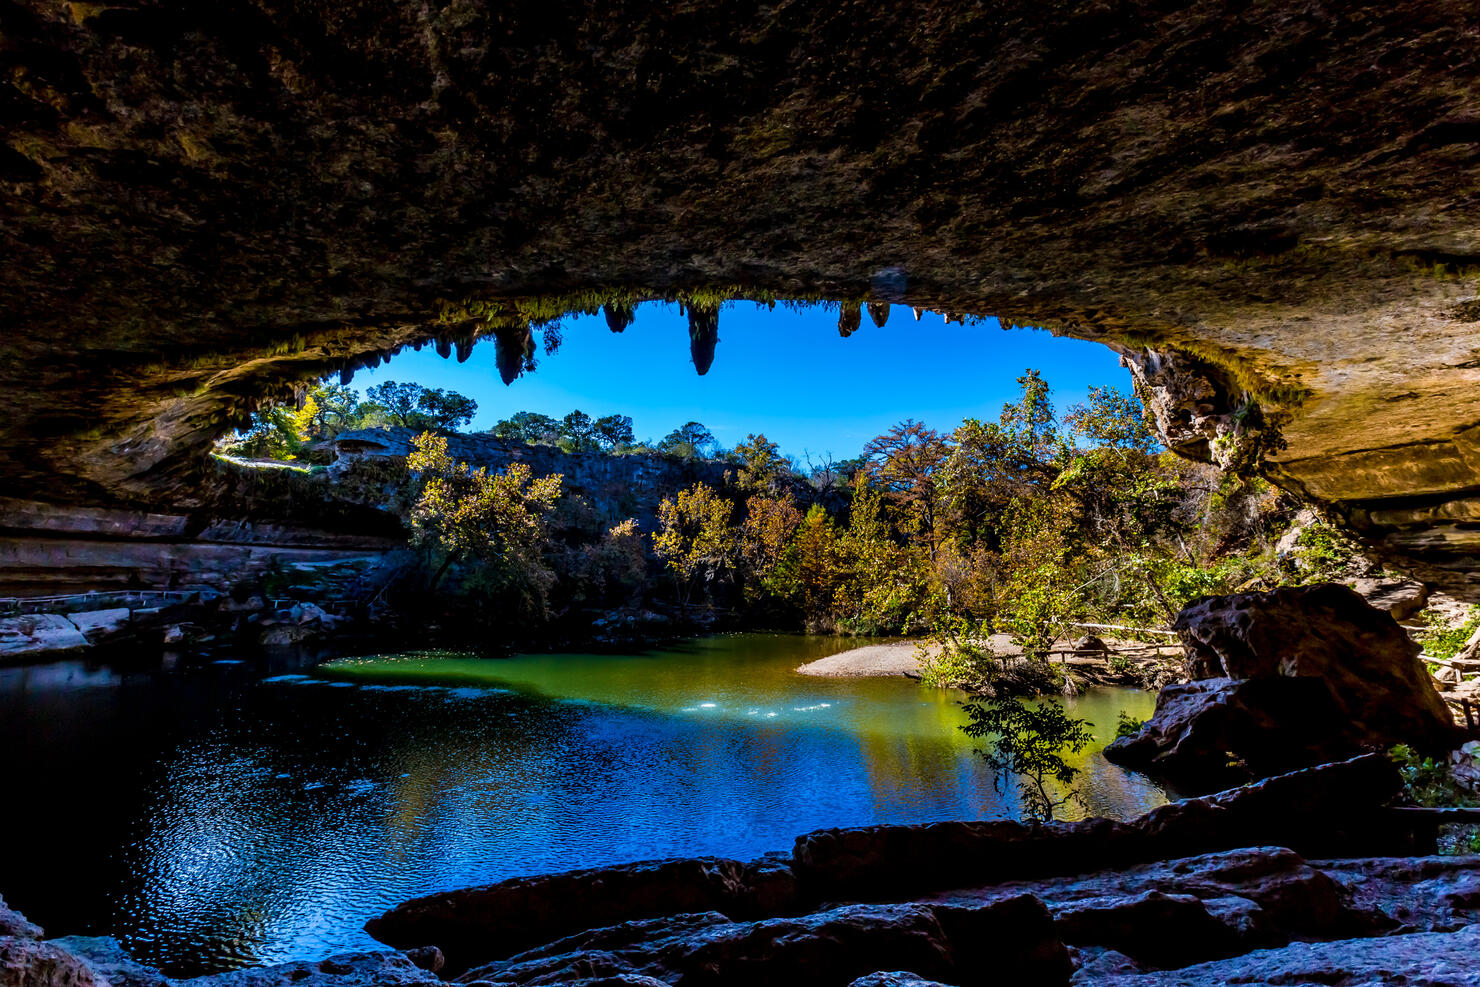 A View of Beautiful Hamilton Pool from Inside the Grotto, Texas.